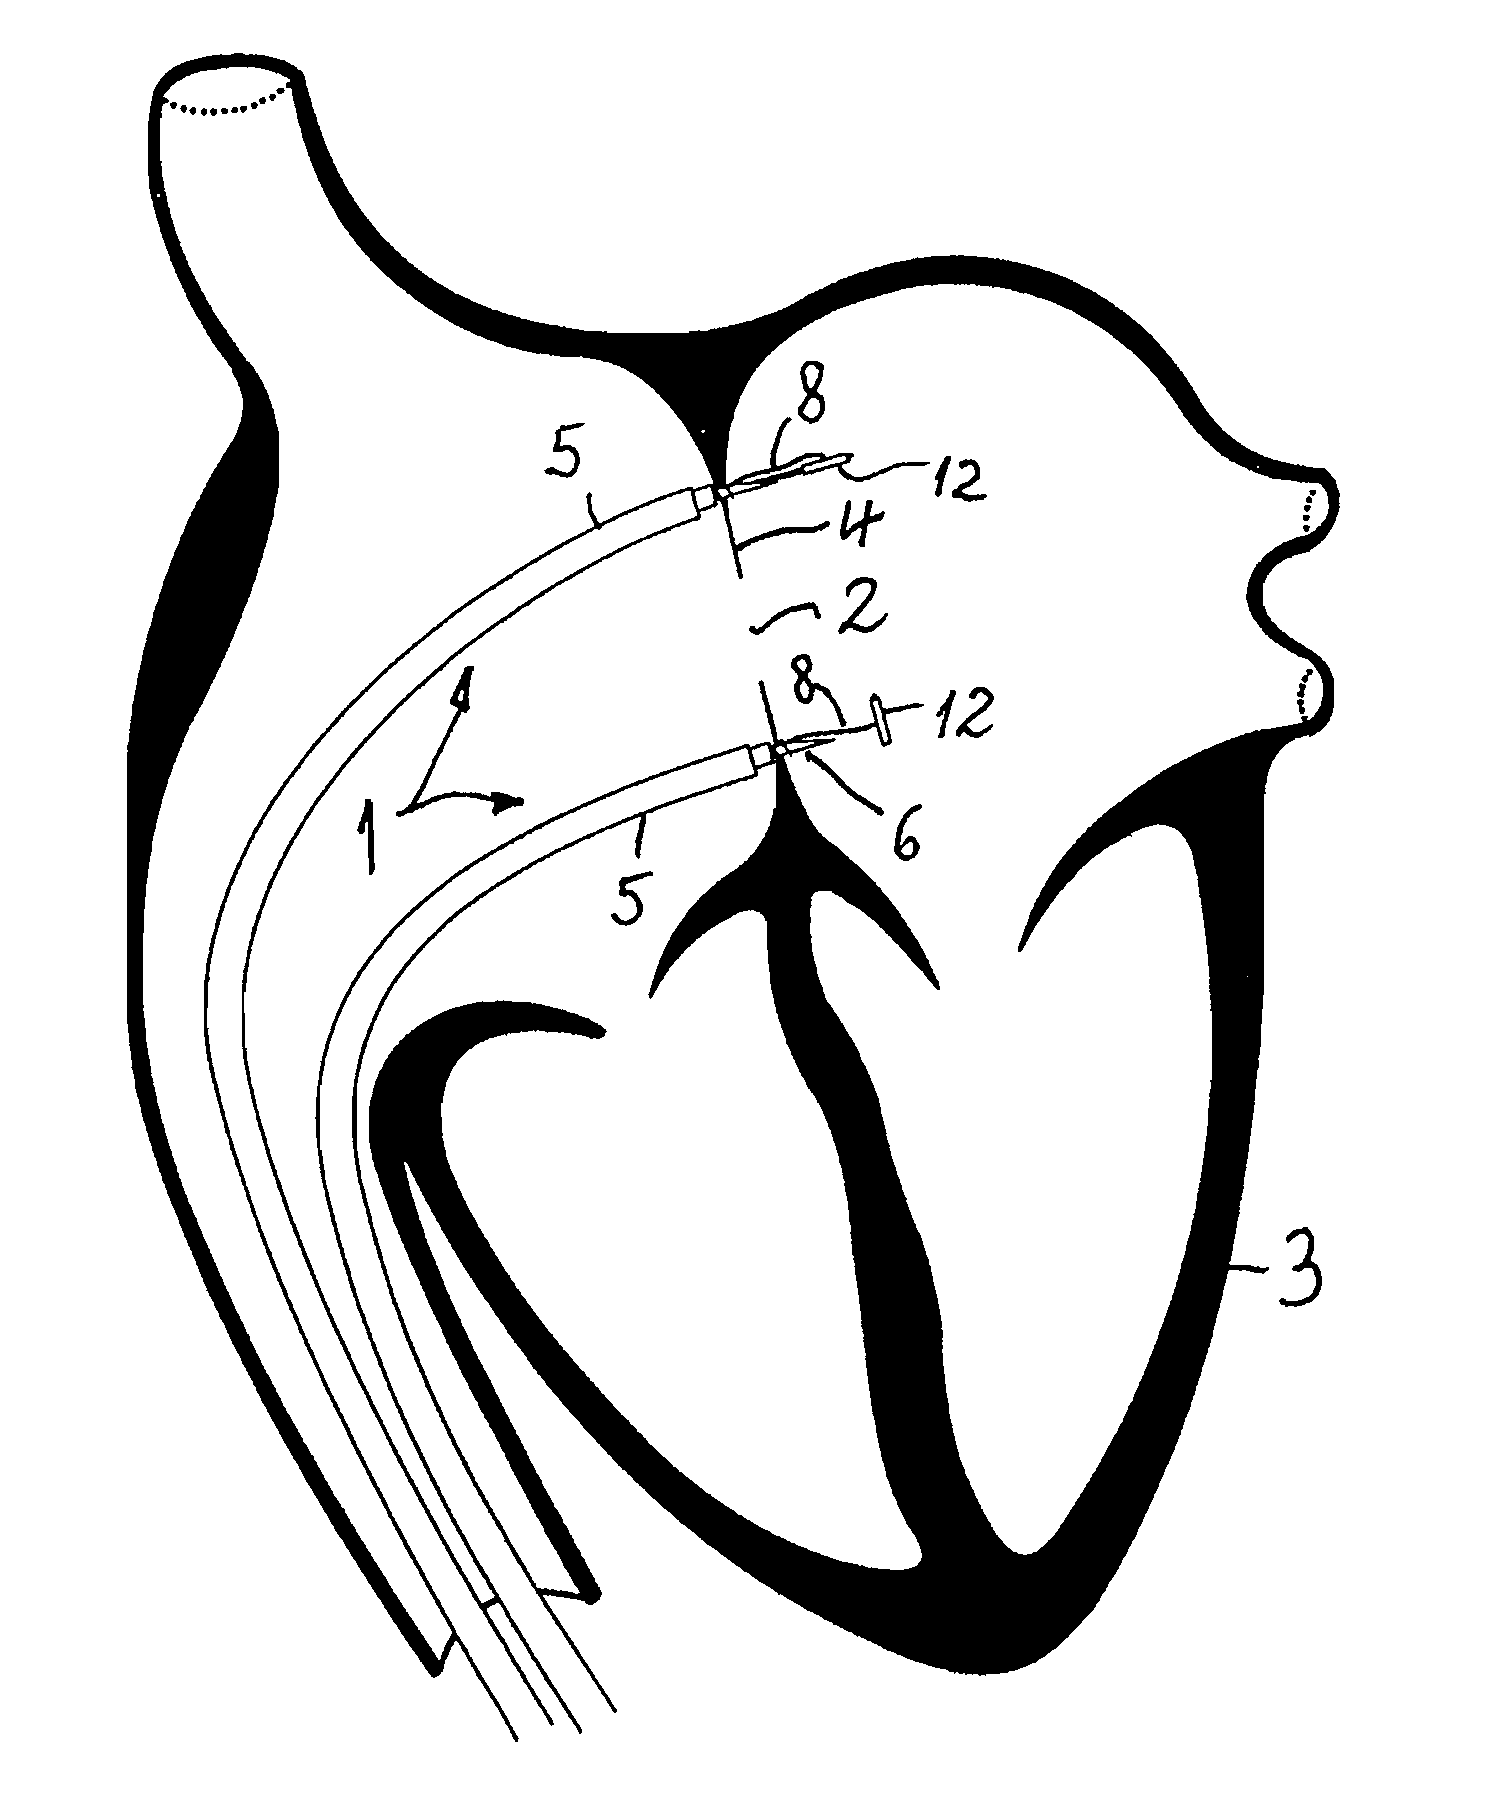 Device for closing an opening located in a heart septum